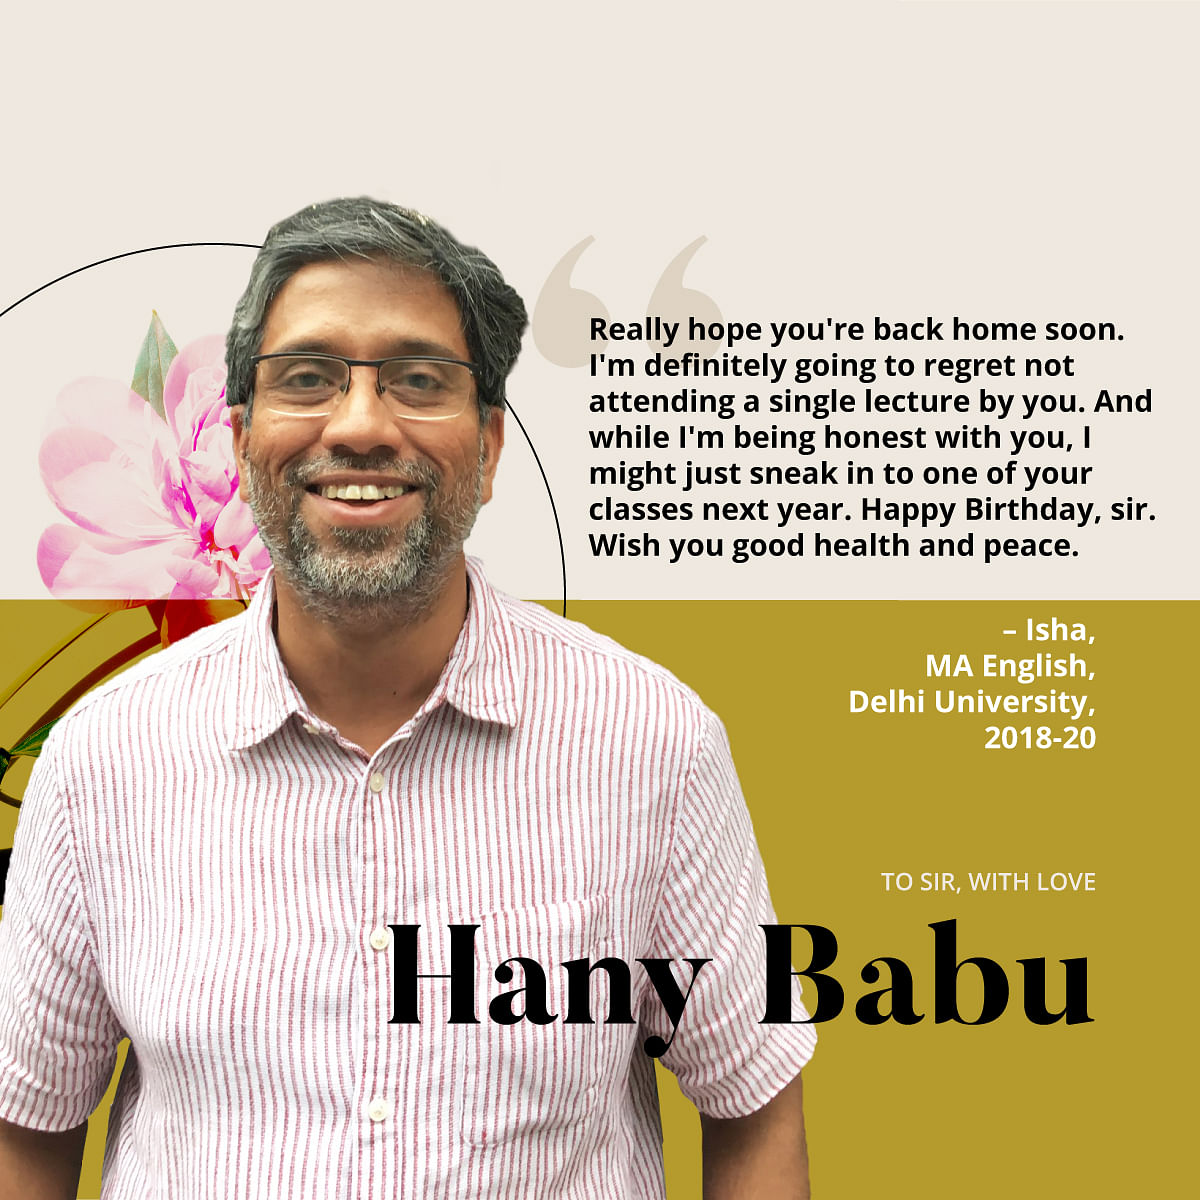 You Are Our Hero: Students Wish Jailed DU Prof Hany Babu on B’day